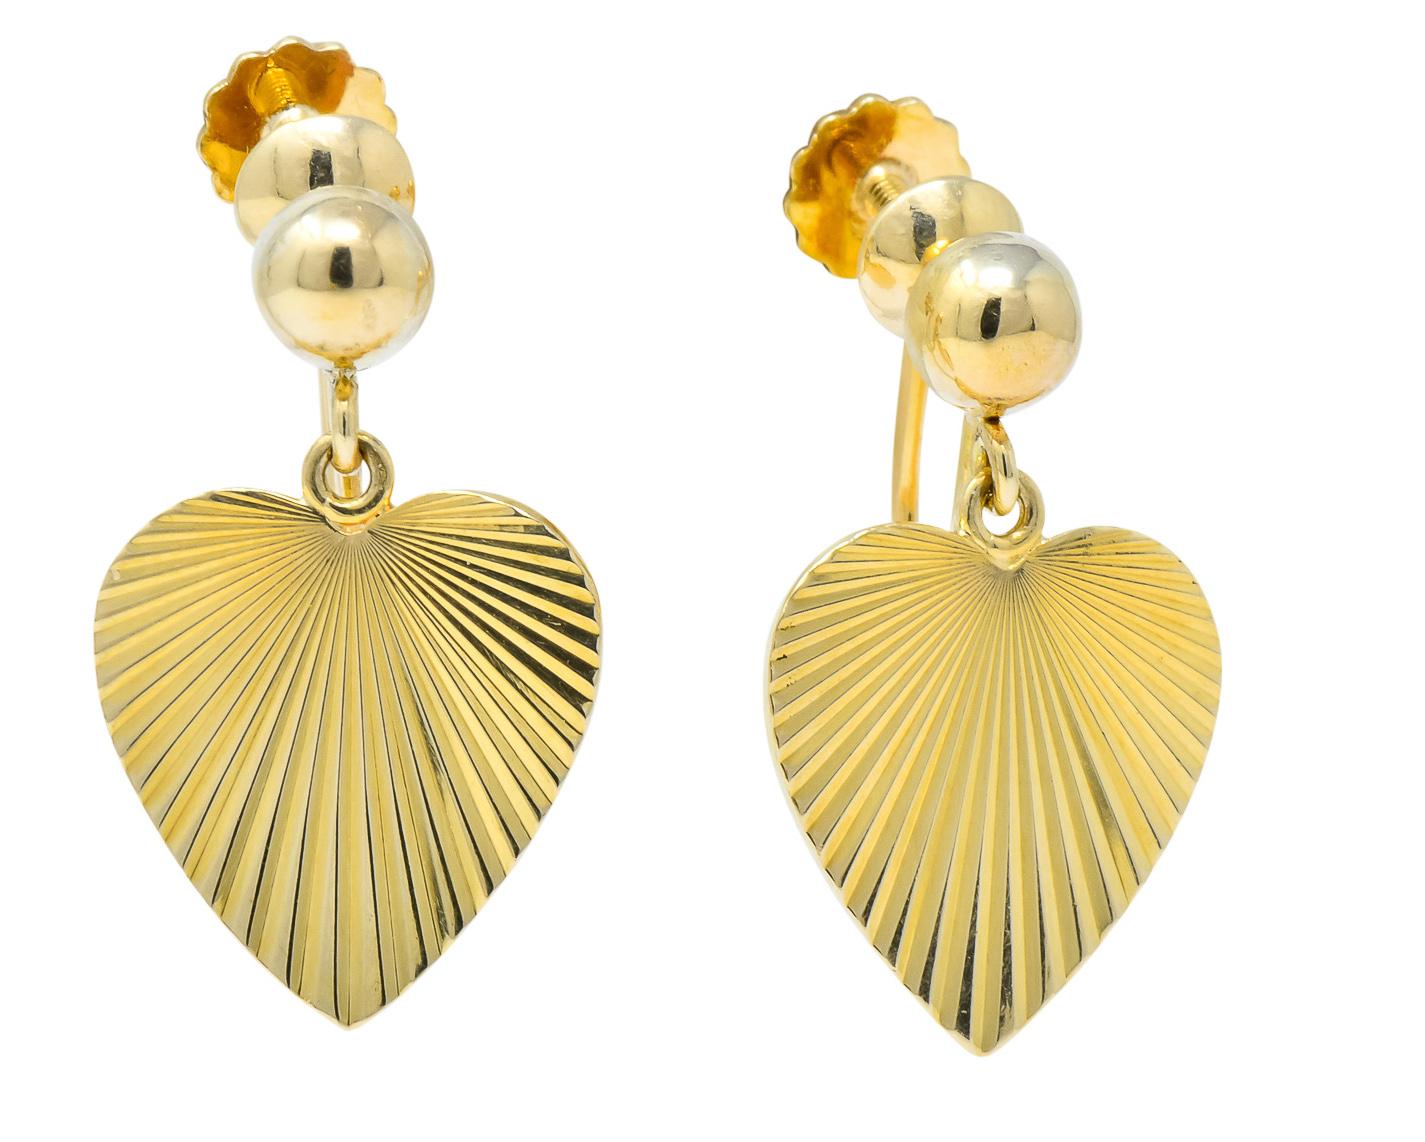 Each designed as a polished ball surmount with a heart drop featuring a radiating motif

Polished faceted finish

Completed by screw-backs

Fully signed Cartier and numbered

Stamped 14k for 14 karat gold

Circa 1940's

Measures: 5/8 x 1 inch

Total